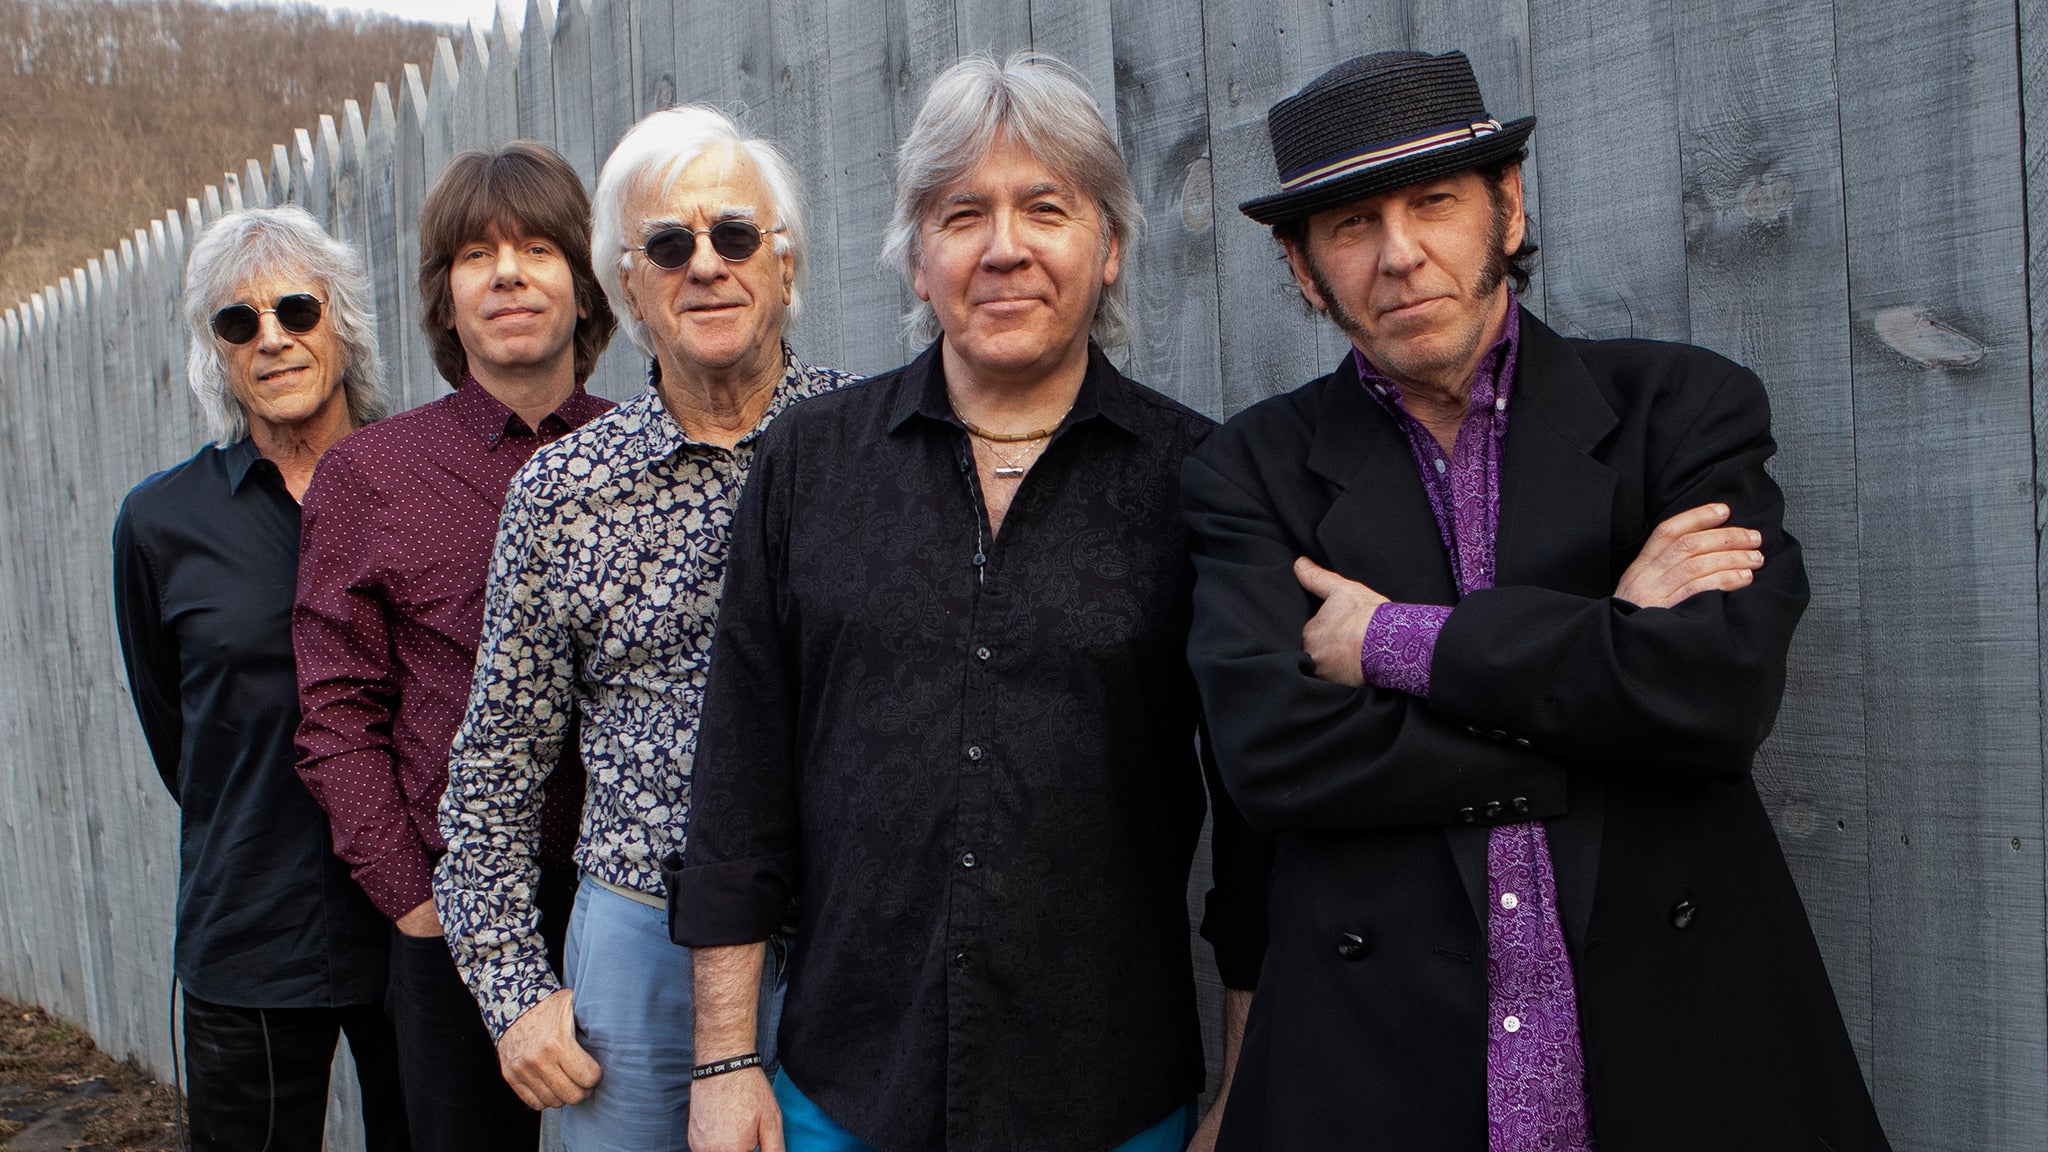 The Yardbirds and Big Brother & The Holding Company presale passcode for early tickets in Staten Island